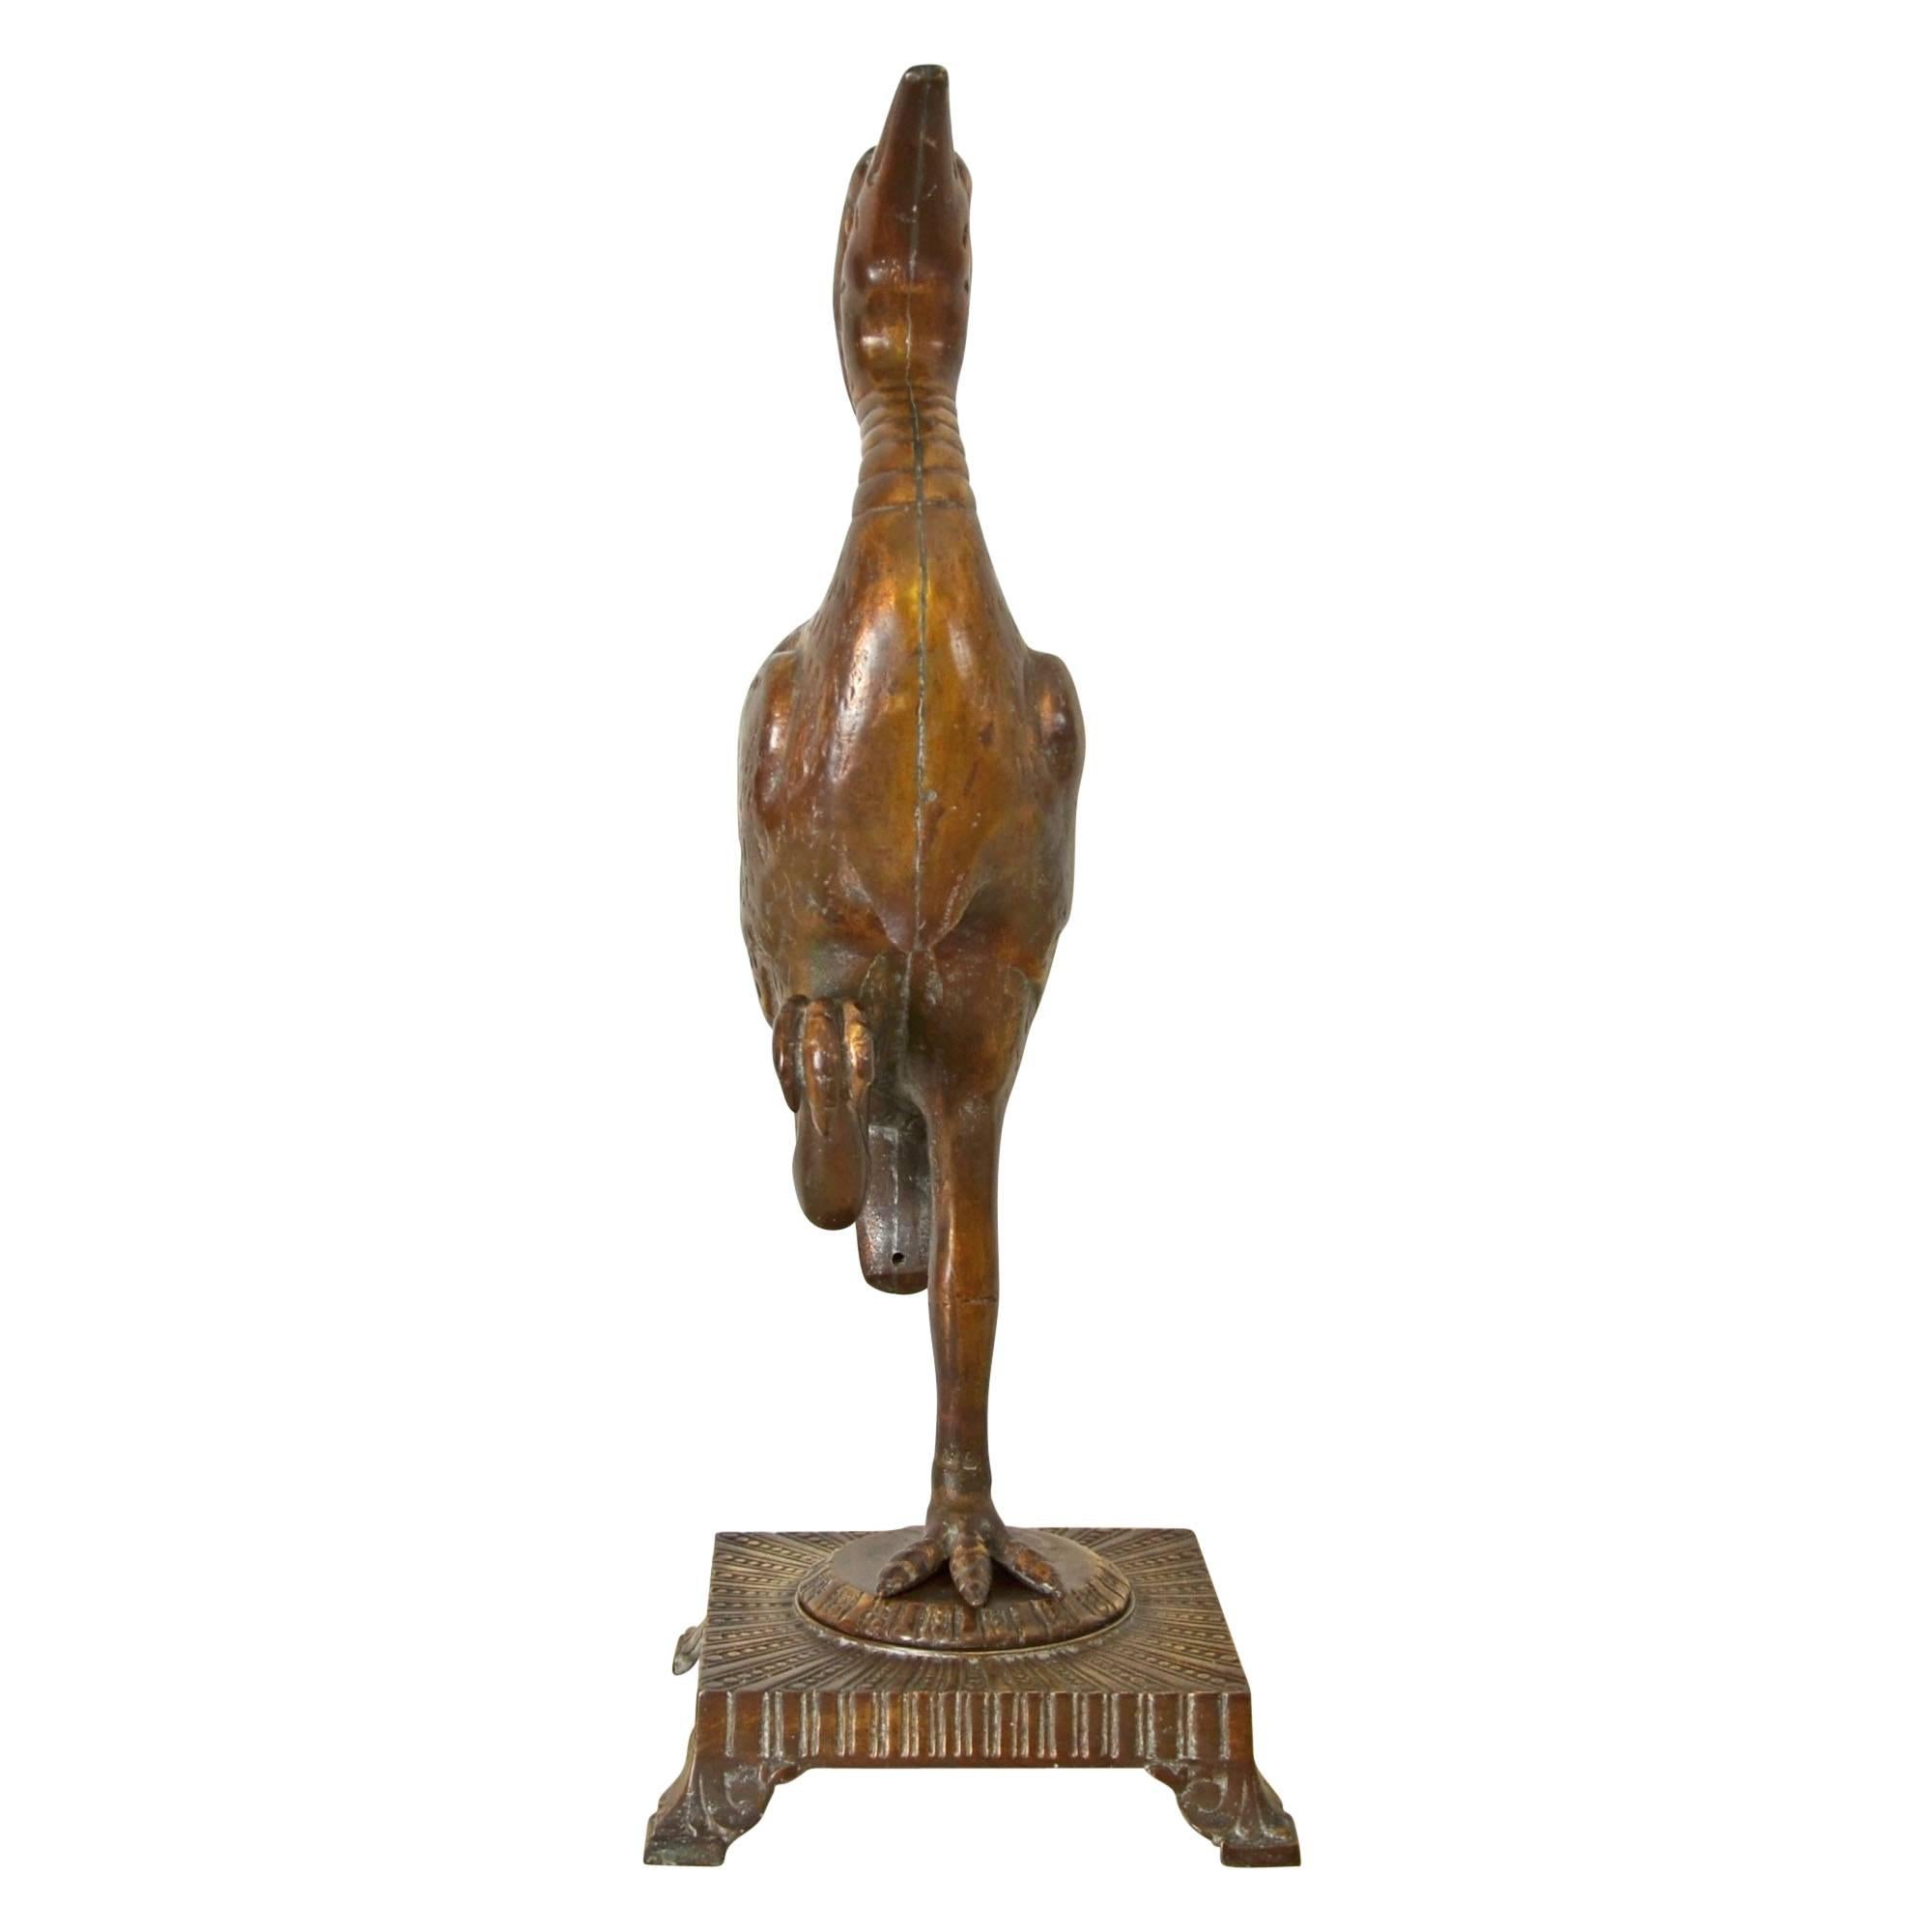 Produced by the F.G. Company (best known for making cast brass and iron lighting parts at the turn of the last century), comes this remarkable red brass egret statue. With incredible detail, the proud egret stands in a characteristic pose,